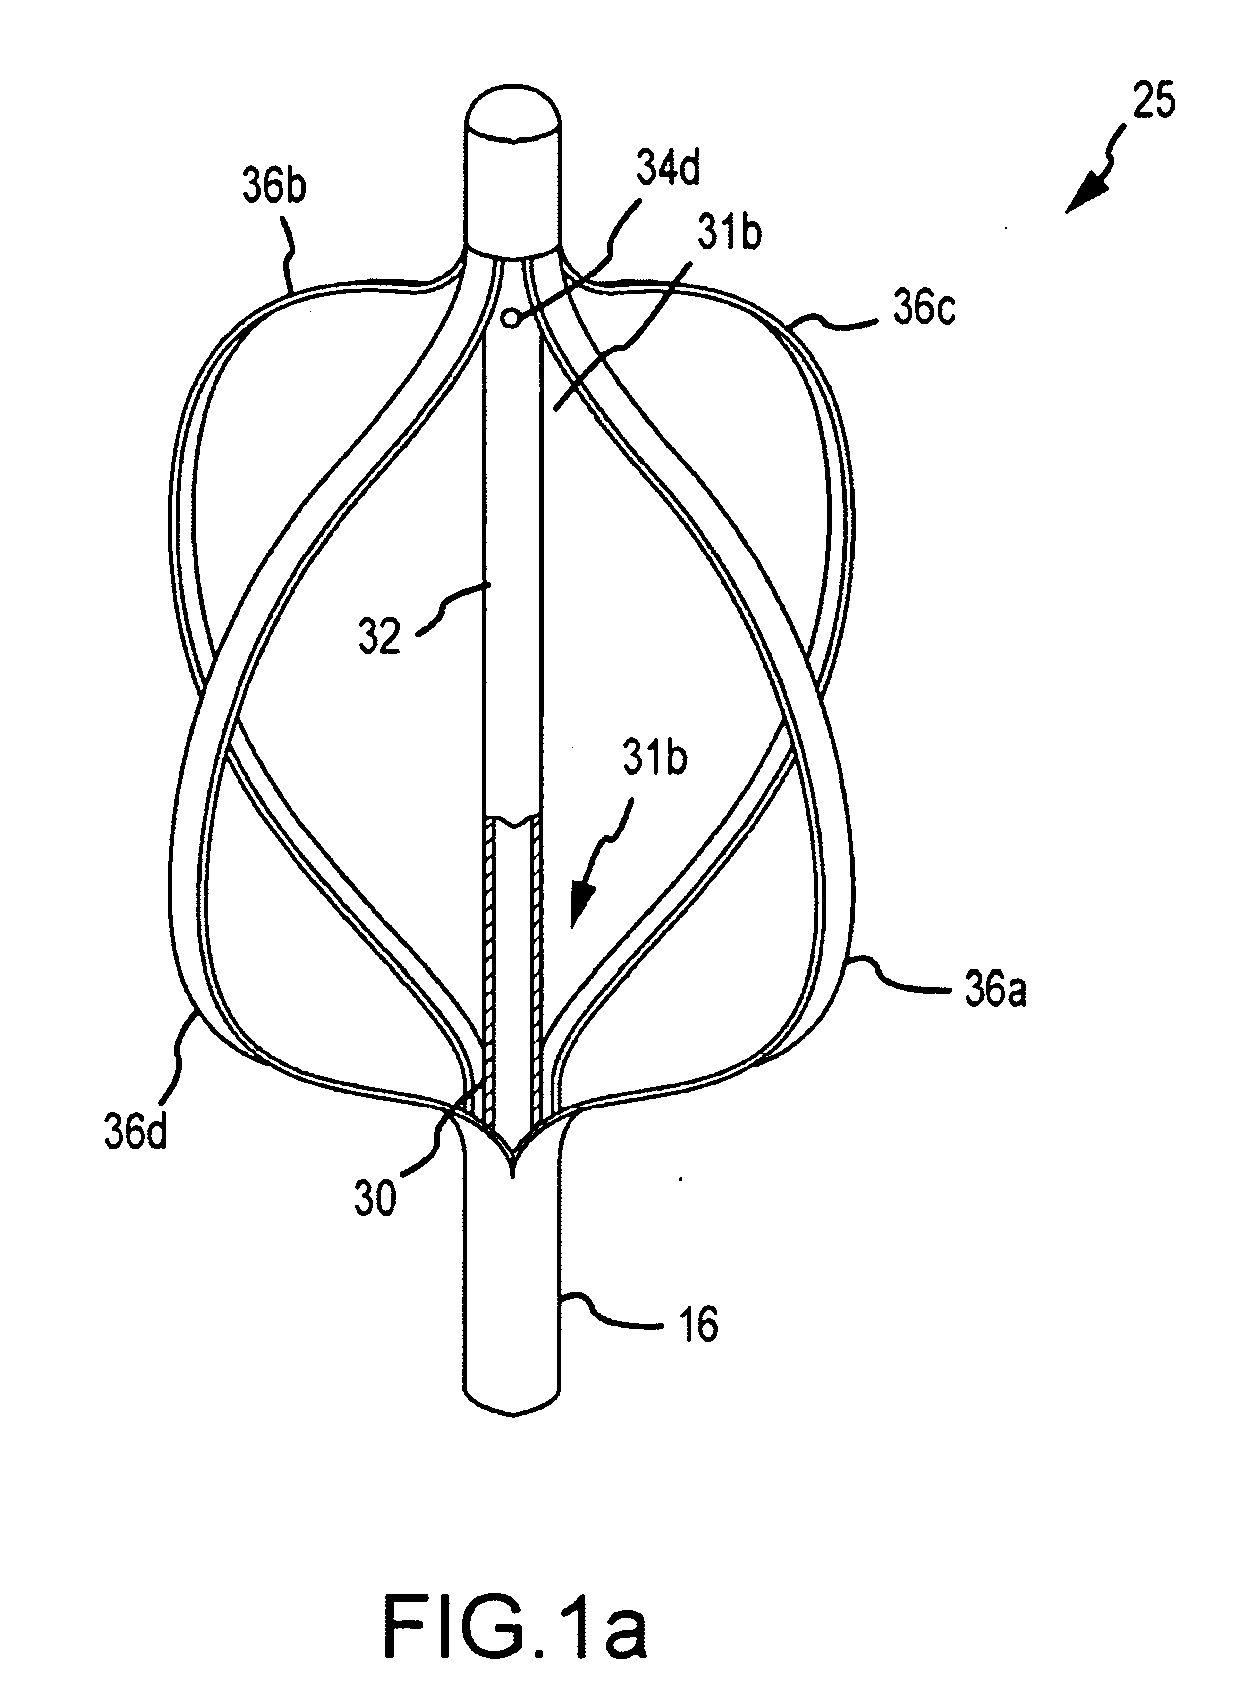 Seal for controlling irrigation in basket catheters